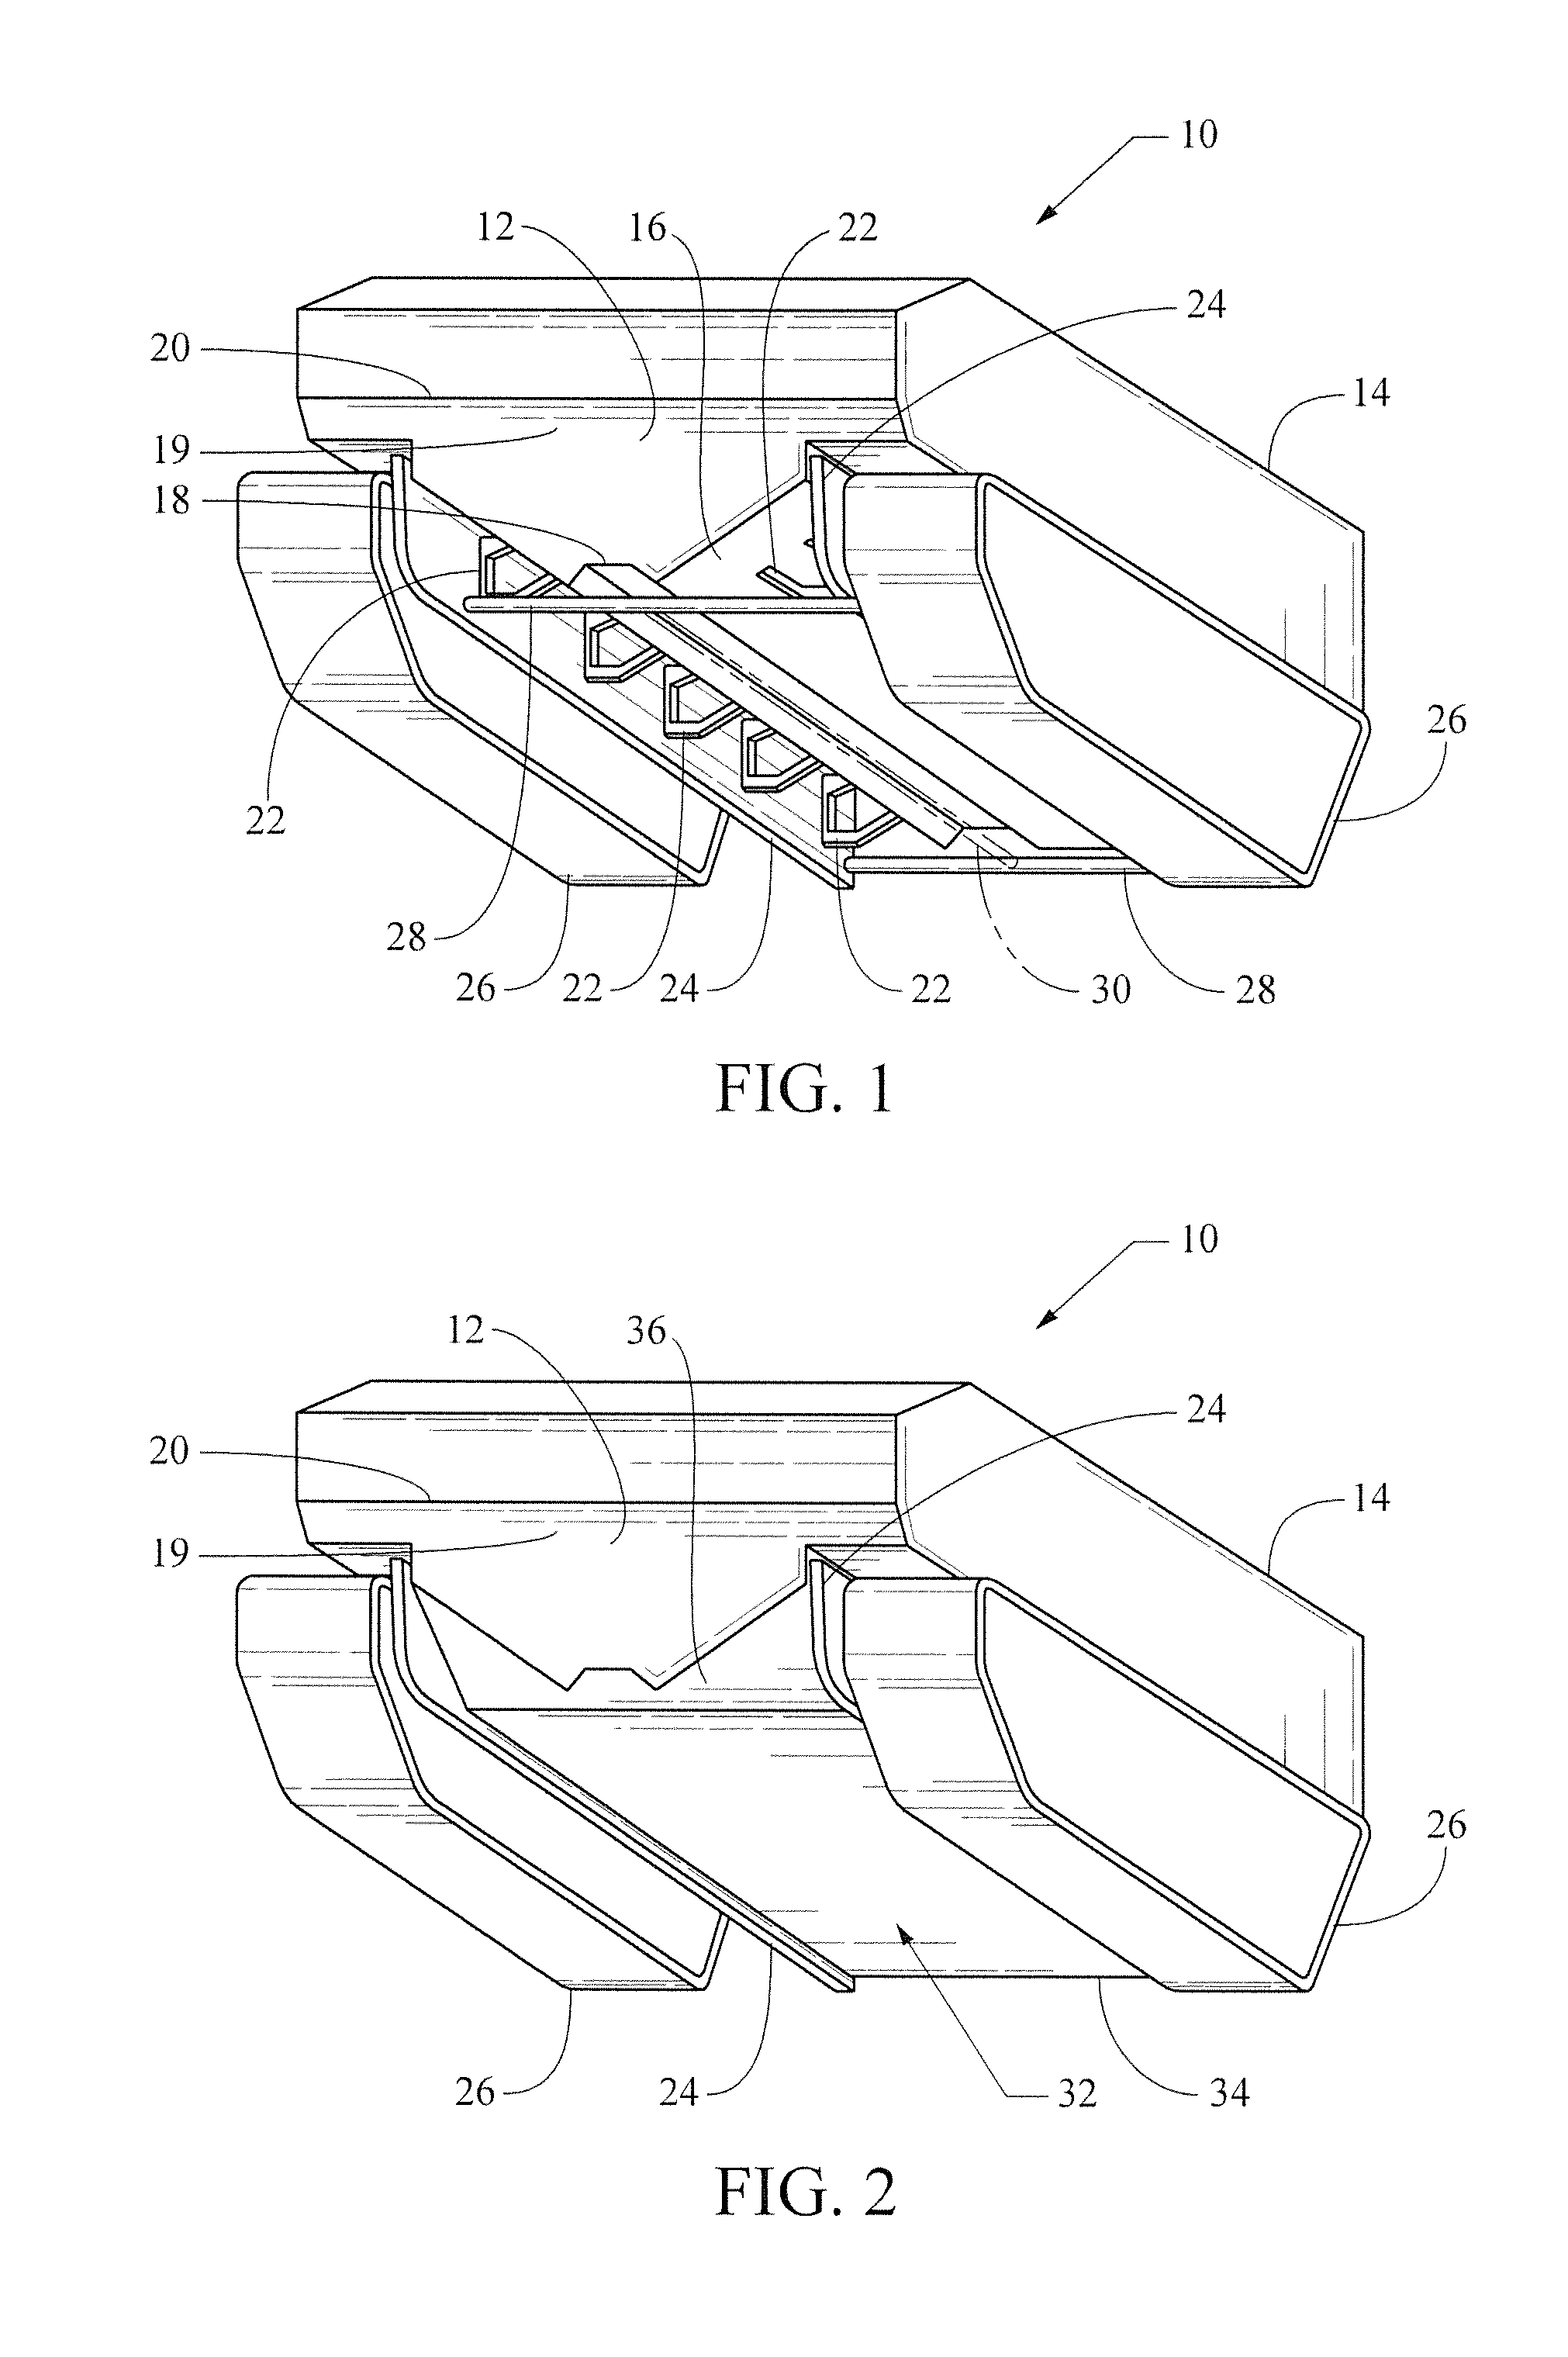 Vehicle with sacrificial underbody structure